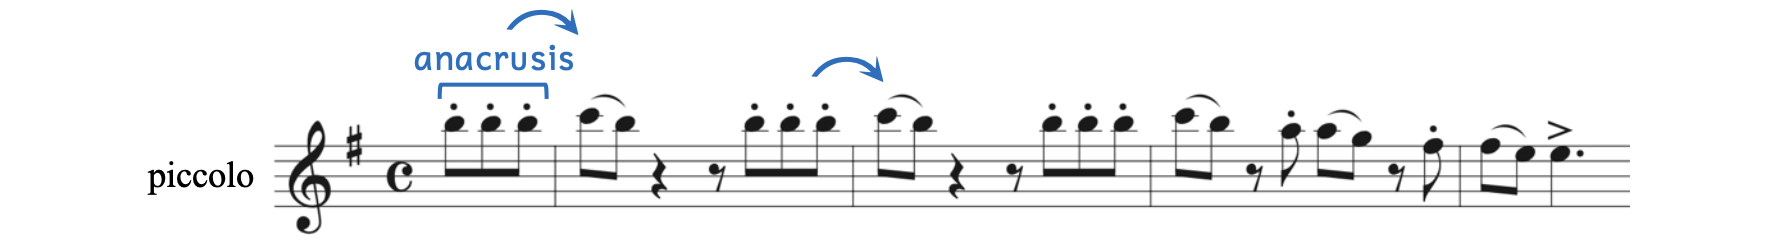 Anacrusis example from Rossini, The Barber of Seville, Overture. The anacrusis consists of three eighth notes. The feeling of upbeat and downbeat is still accomplished.